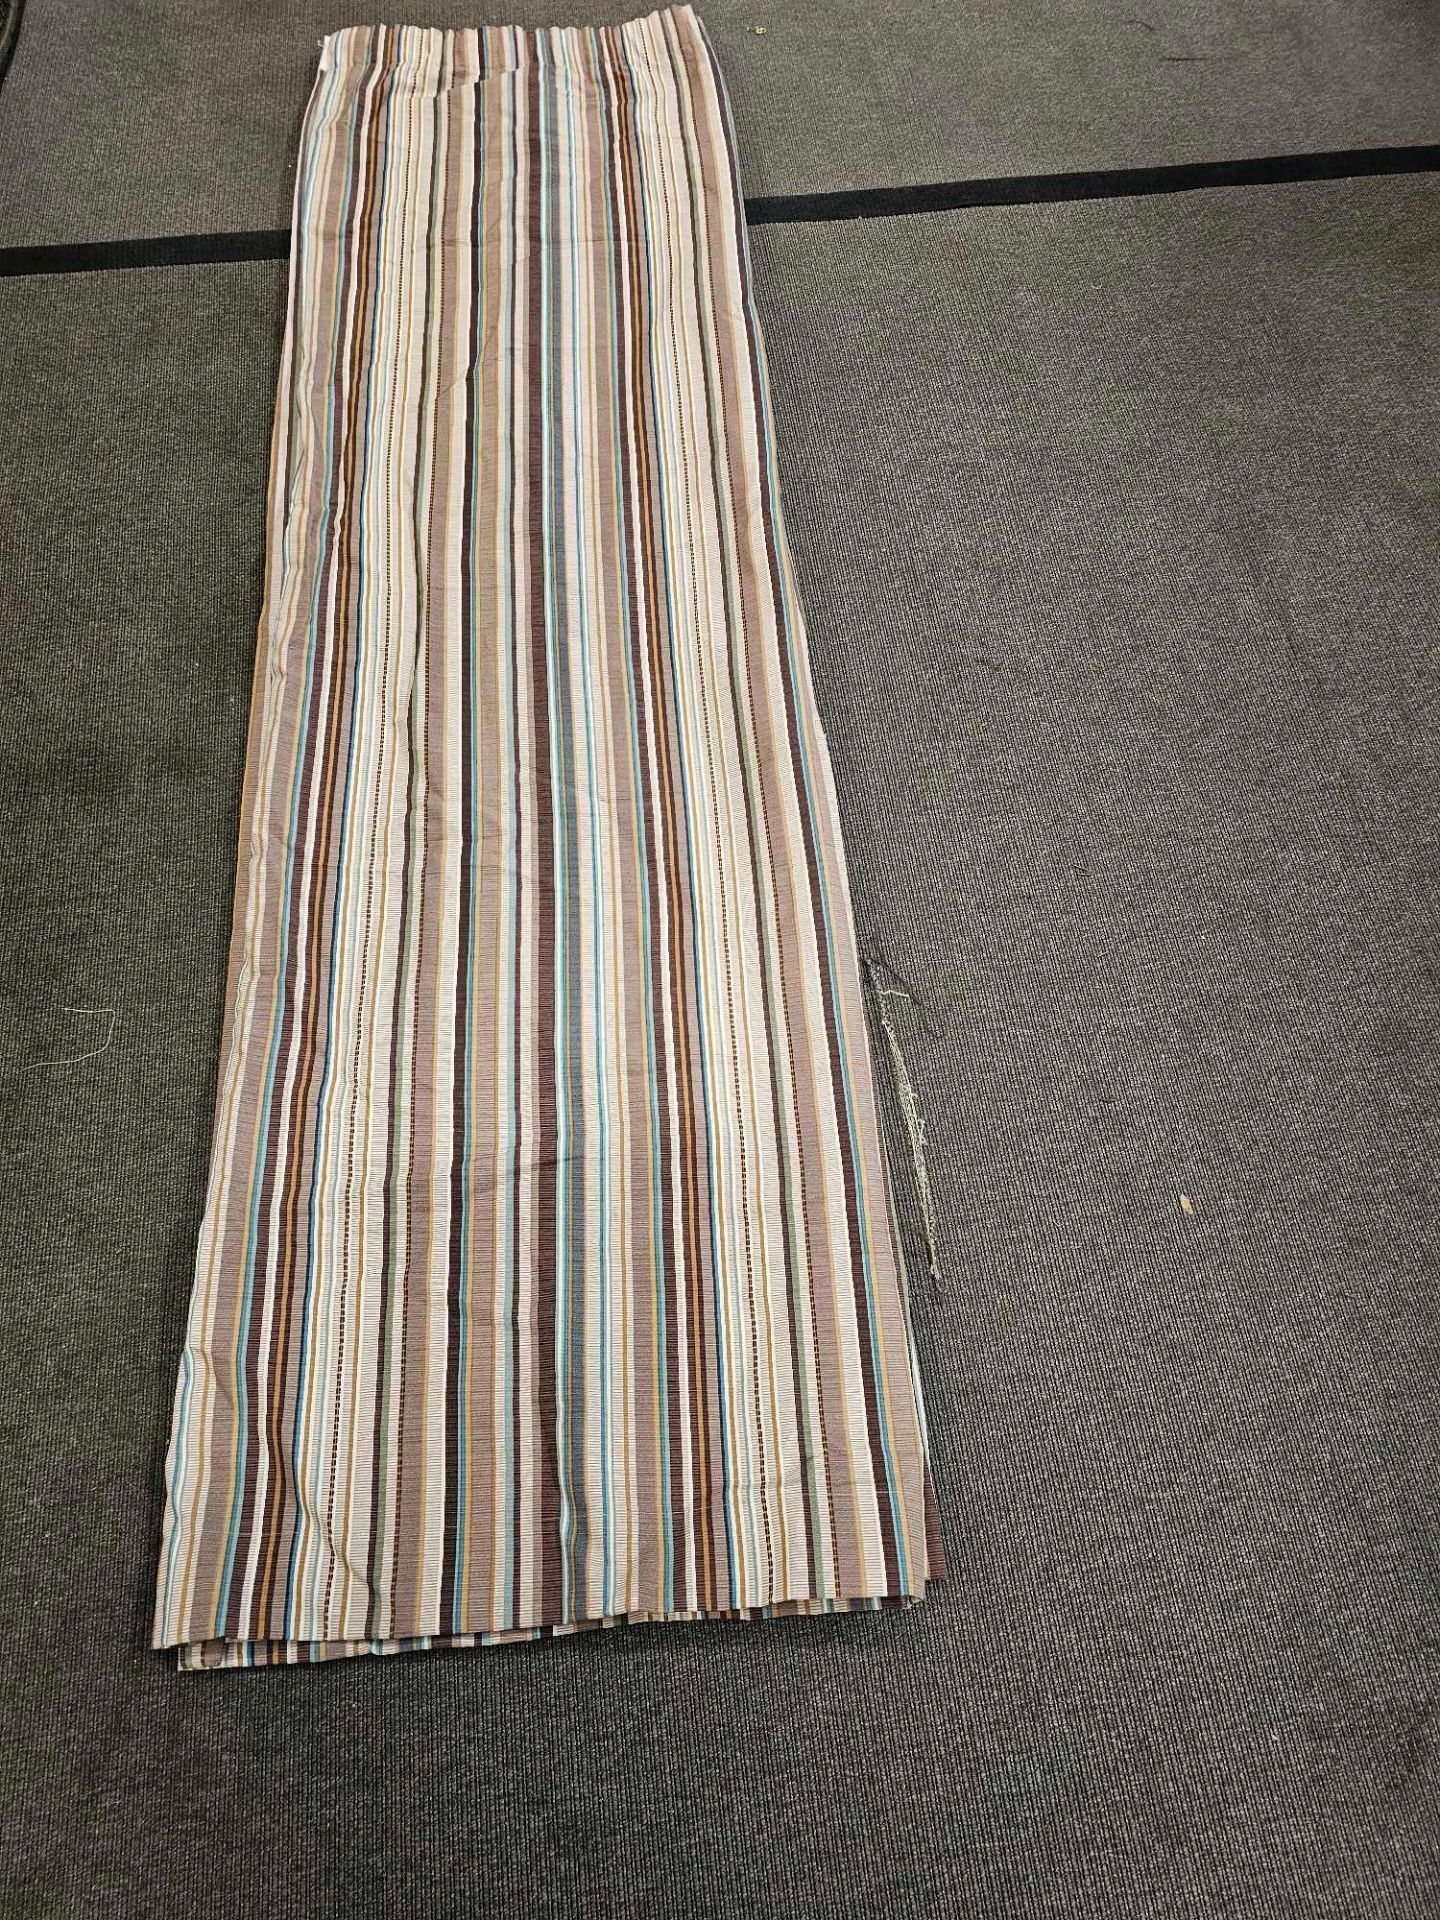 A Pair If Fabric Striped Curtains Brown Beige Green Blue Size -cm 220 x 200 Ref Dorch 73